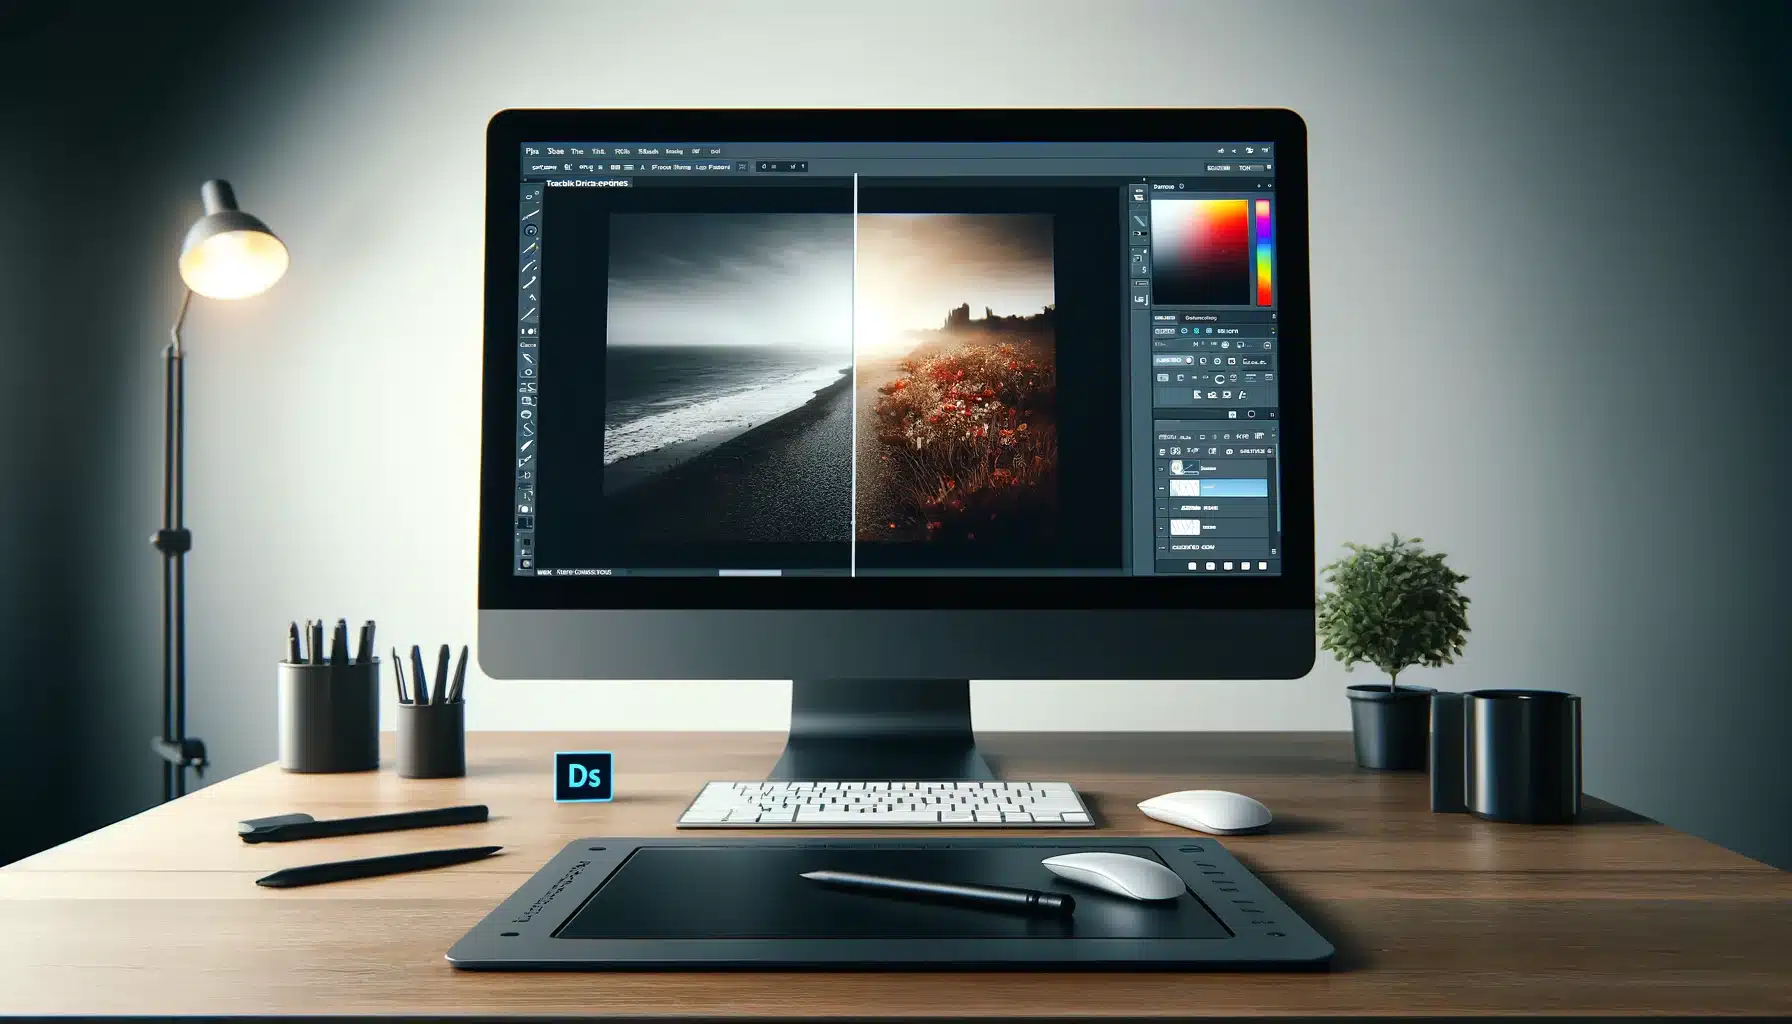 Computer monitor displaying Photoshop's 'Sharpen' tool, showing the before and after effects of image sharpening in a modern graphic design workspace.